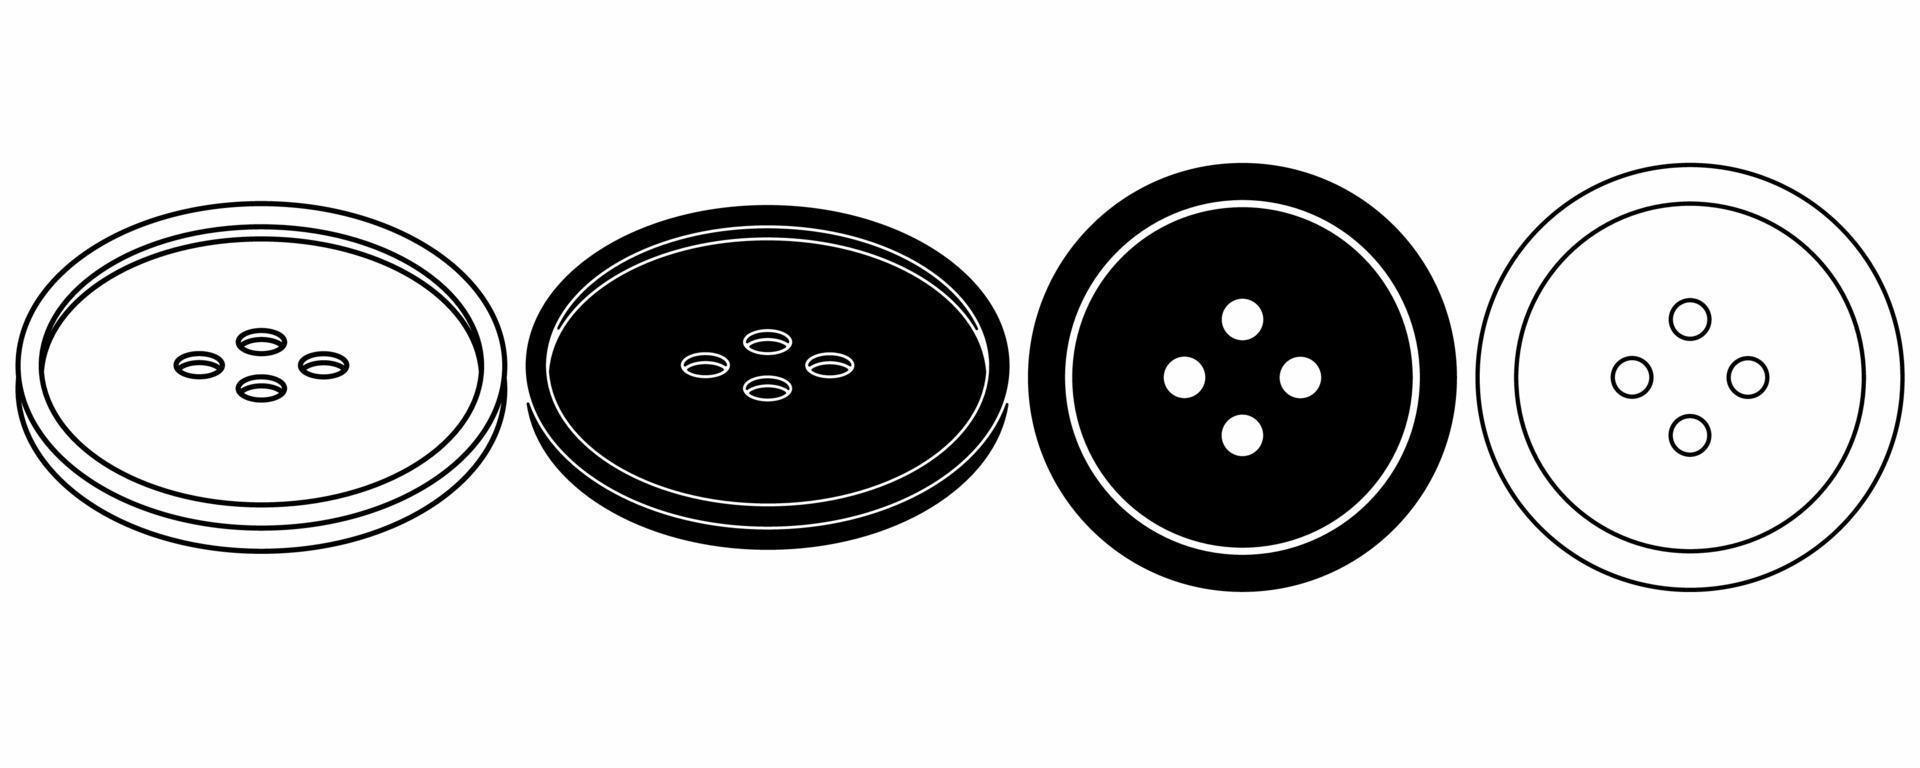 outline silhouette shirt button icon set isolated on white background vector